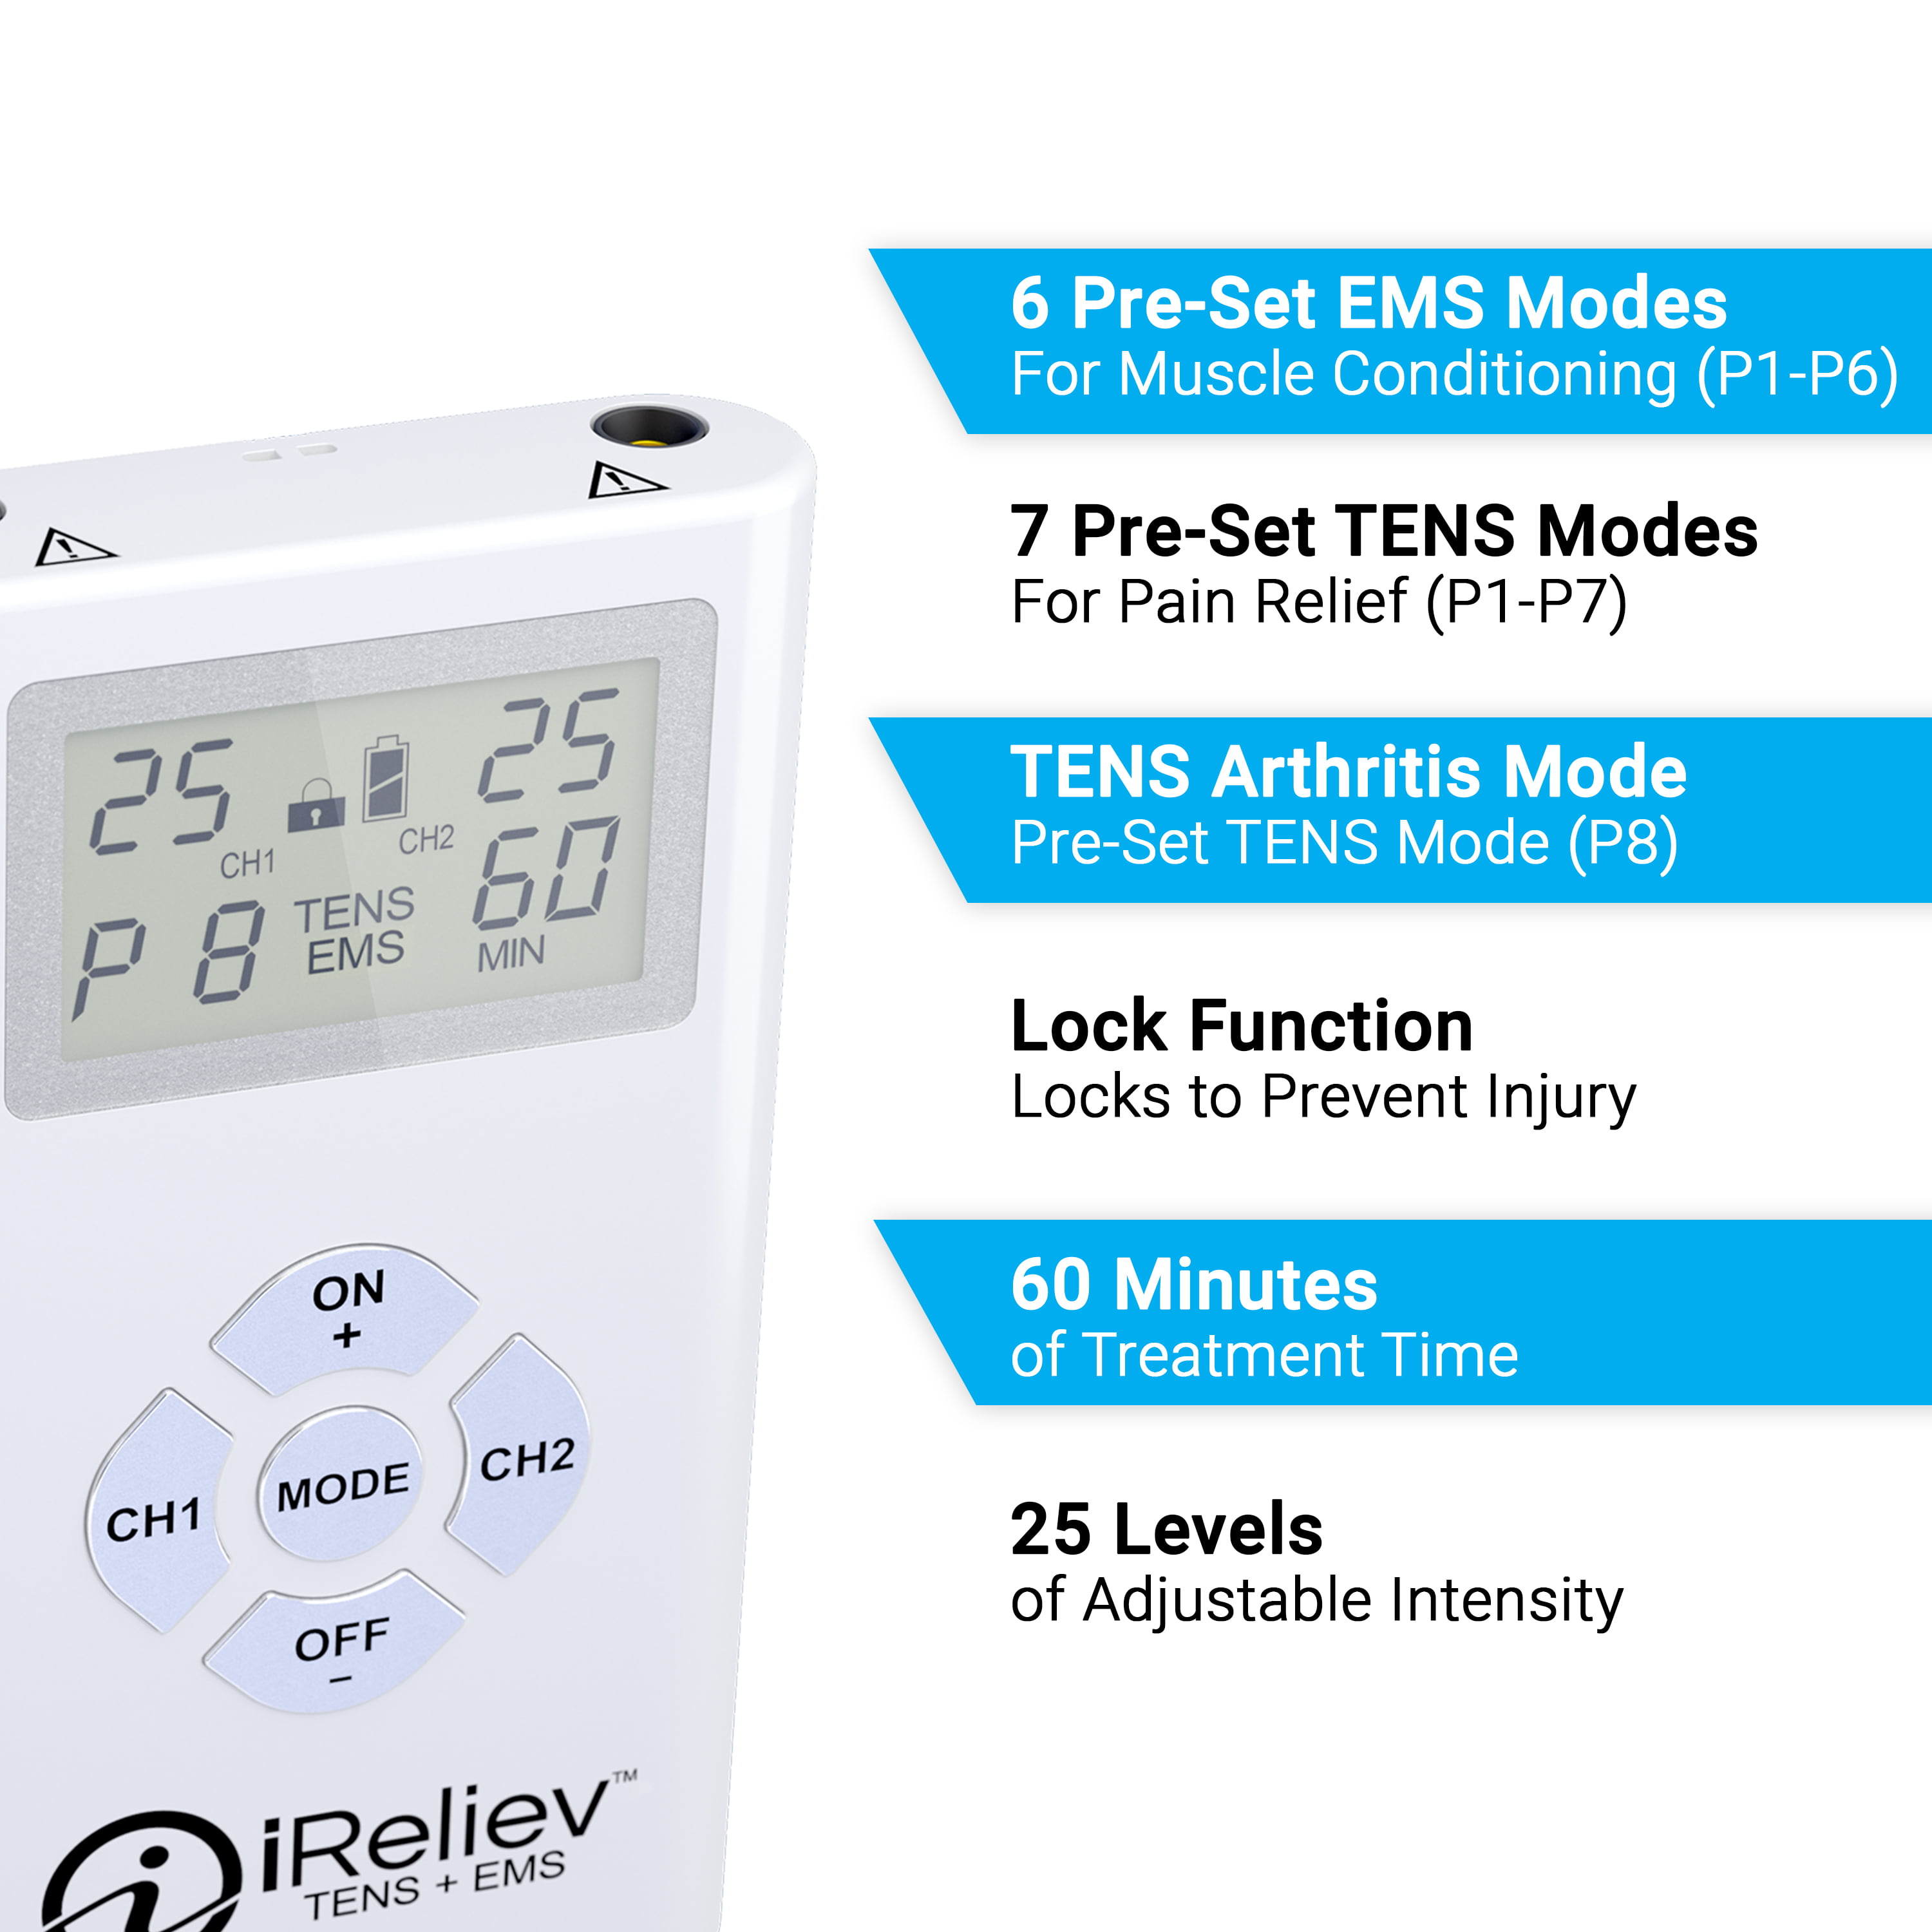 ET-7070 iReliev Strength & Recovery Tens & EMS System